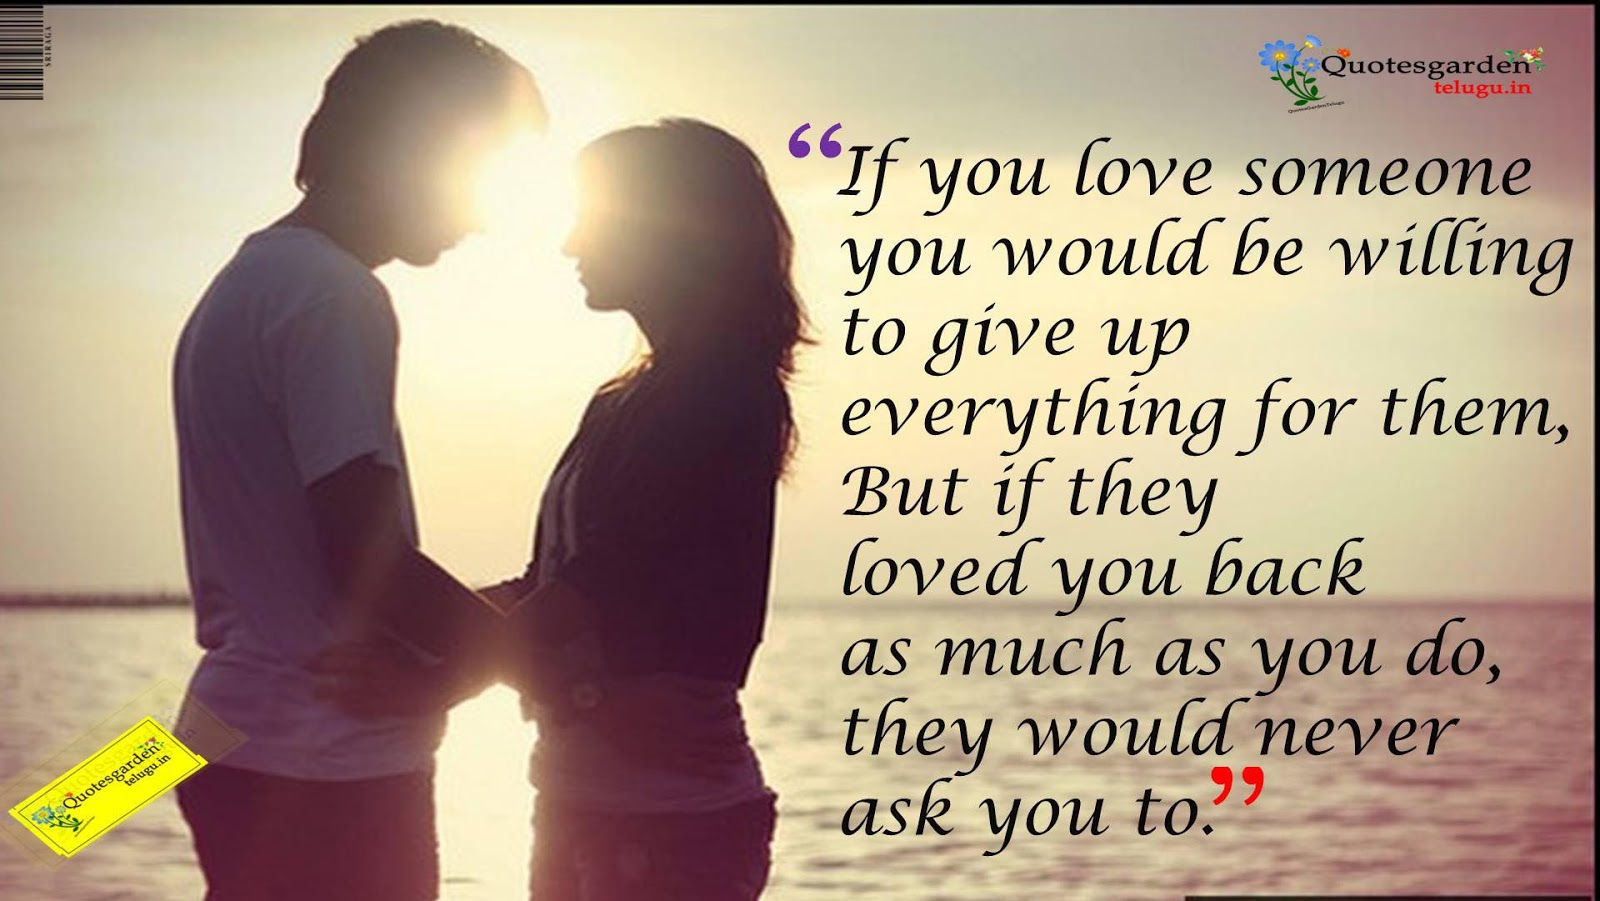 Heart Touching Quote For Boyfriend Best heart touching love quotes with hd wallpapers